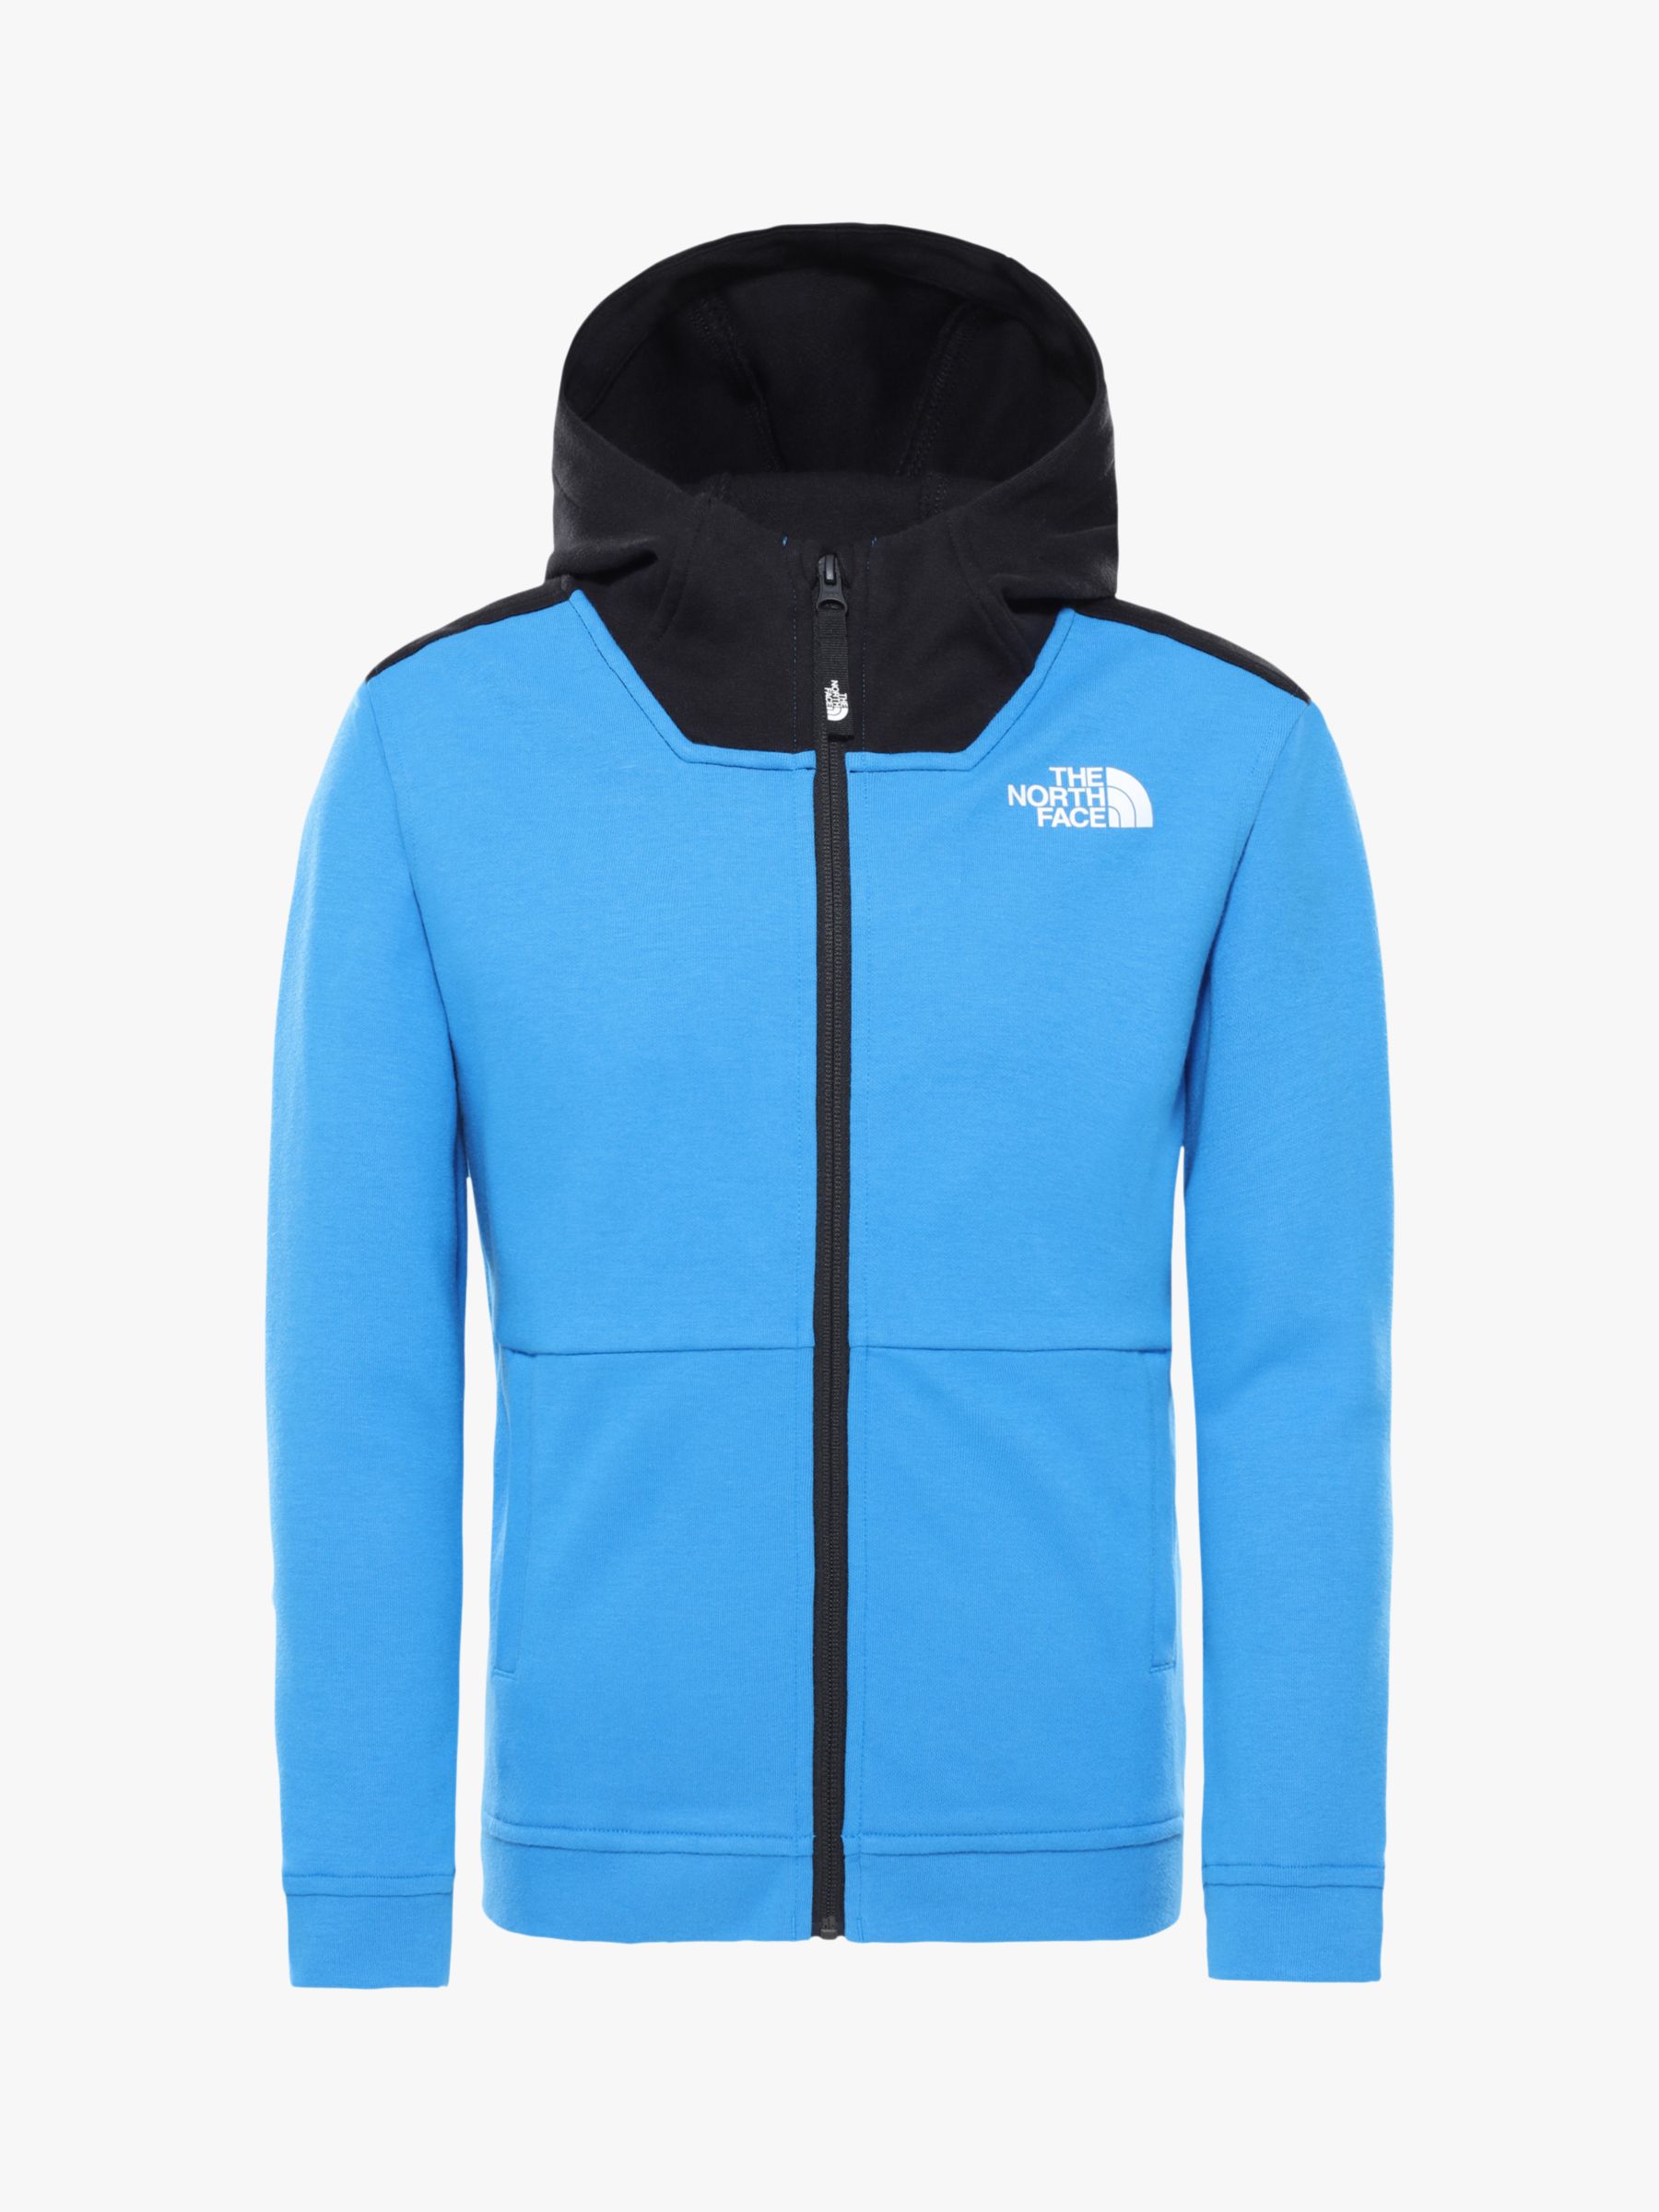 Image of The North Face Boys Slacker Full Zip Hoodie Clear Lake Blue